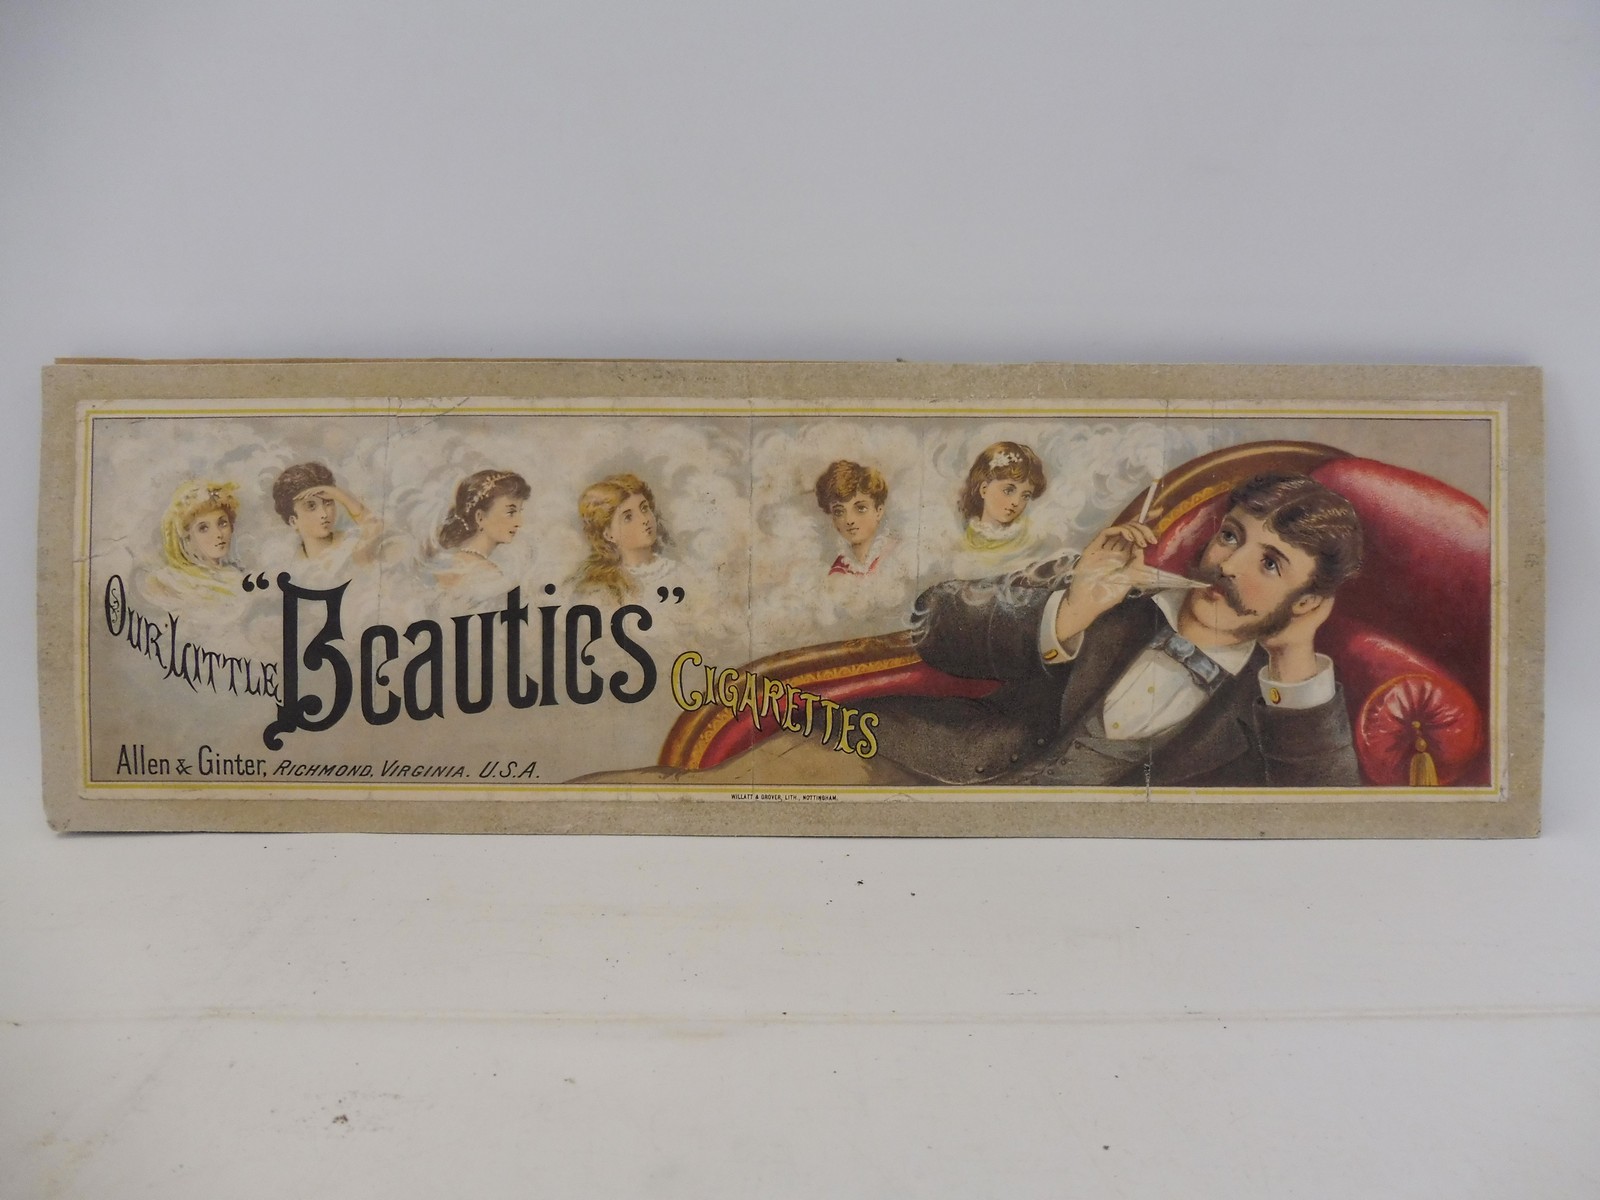 A small pictorial advertisement for 'Our Little Beauties' Cigarettes by Allen & Ginter, Richmond